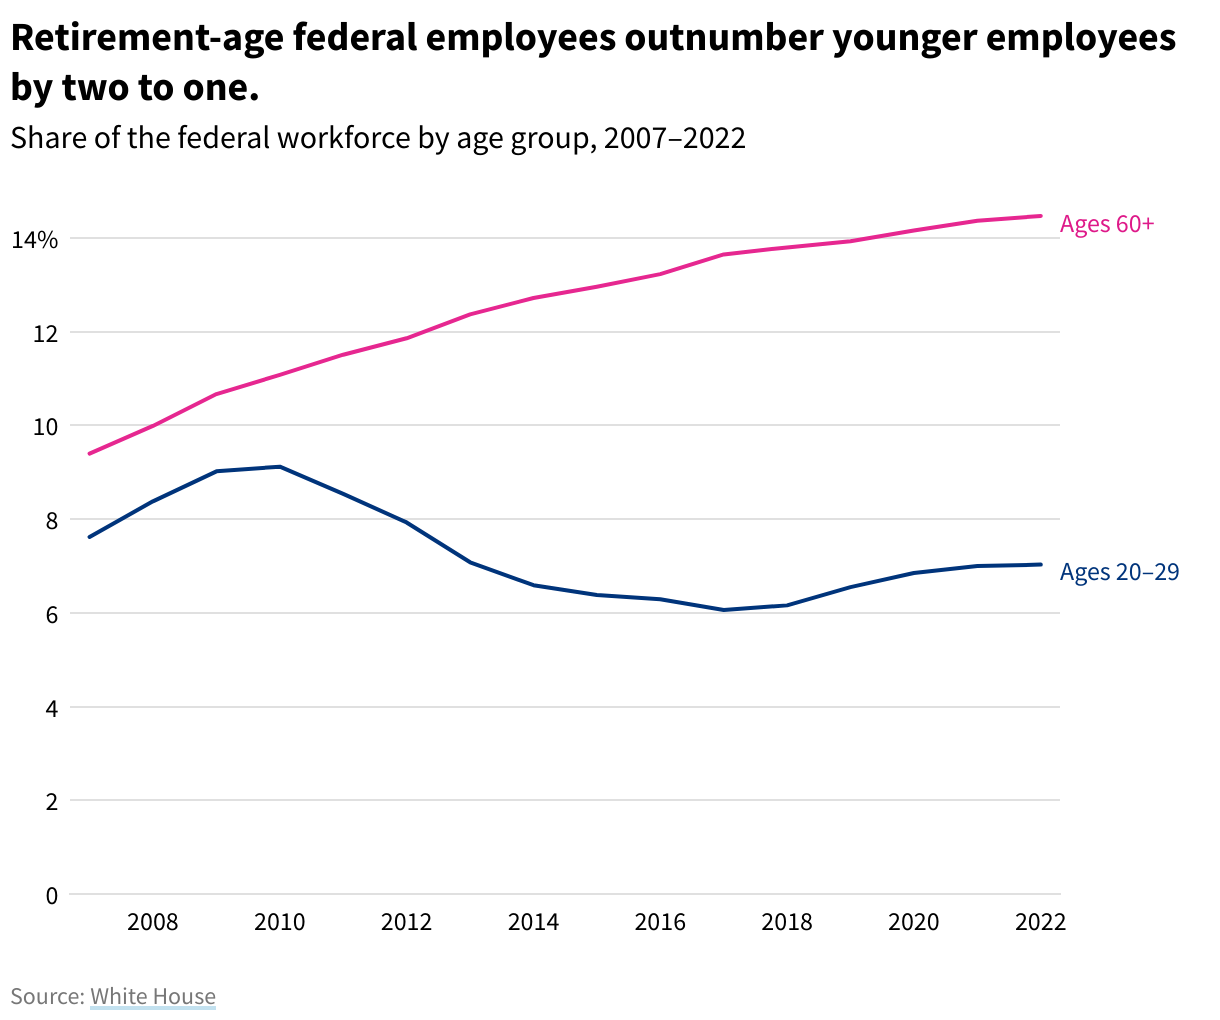 Line chart showing the share of federal employees age 60+ and those from age 20 to 29. In 2022, age 60+ made up 14.5% of the workforce, and ages 20 to 29 made up 7%. 